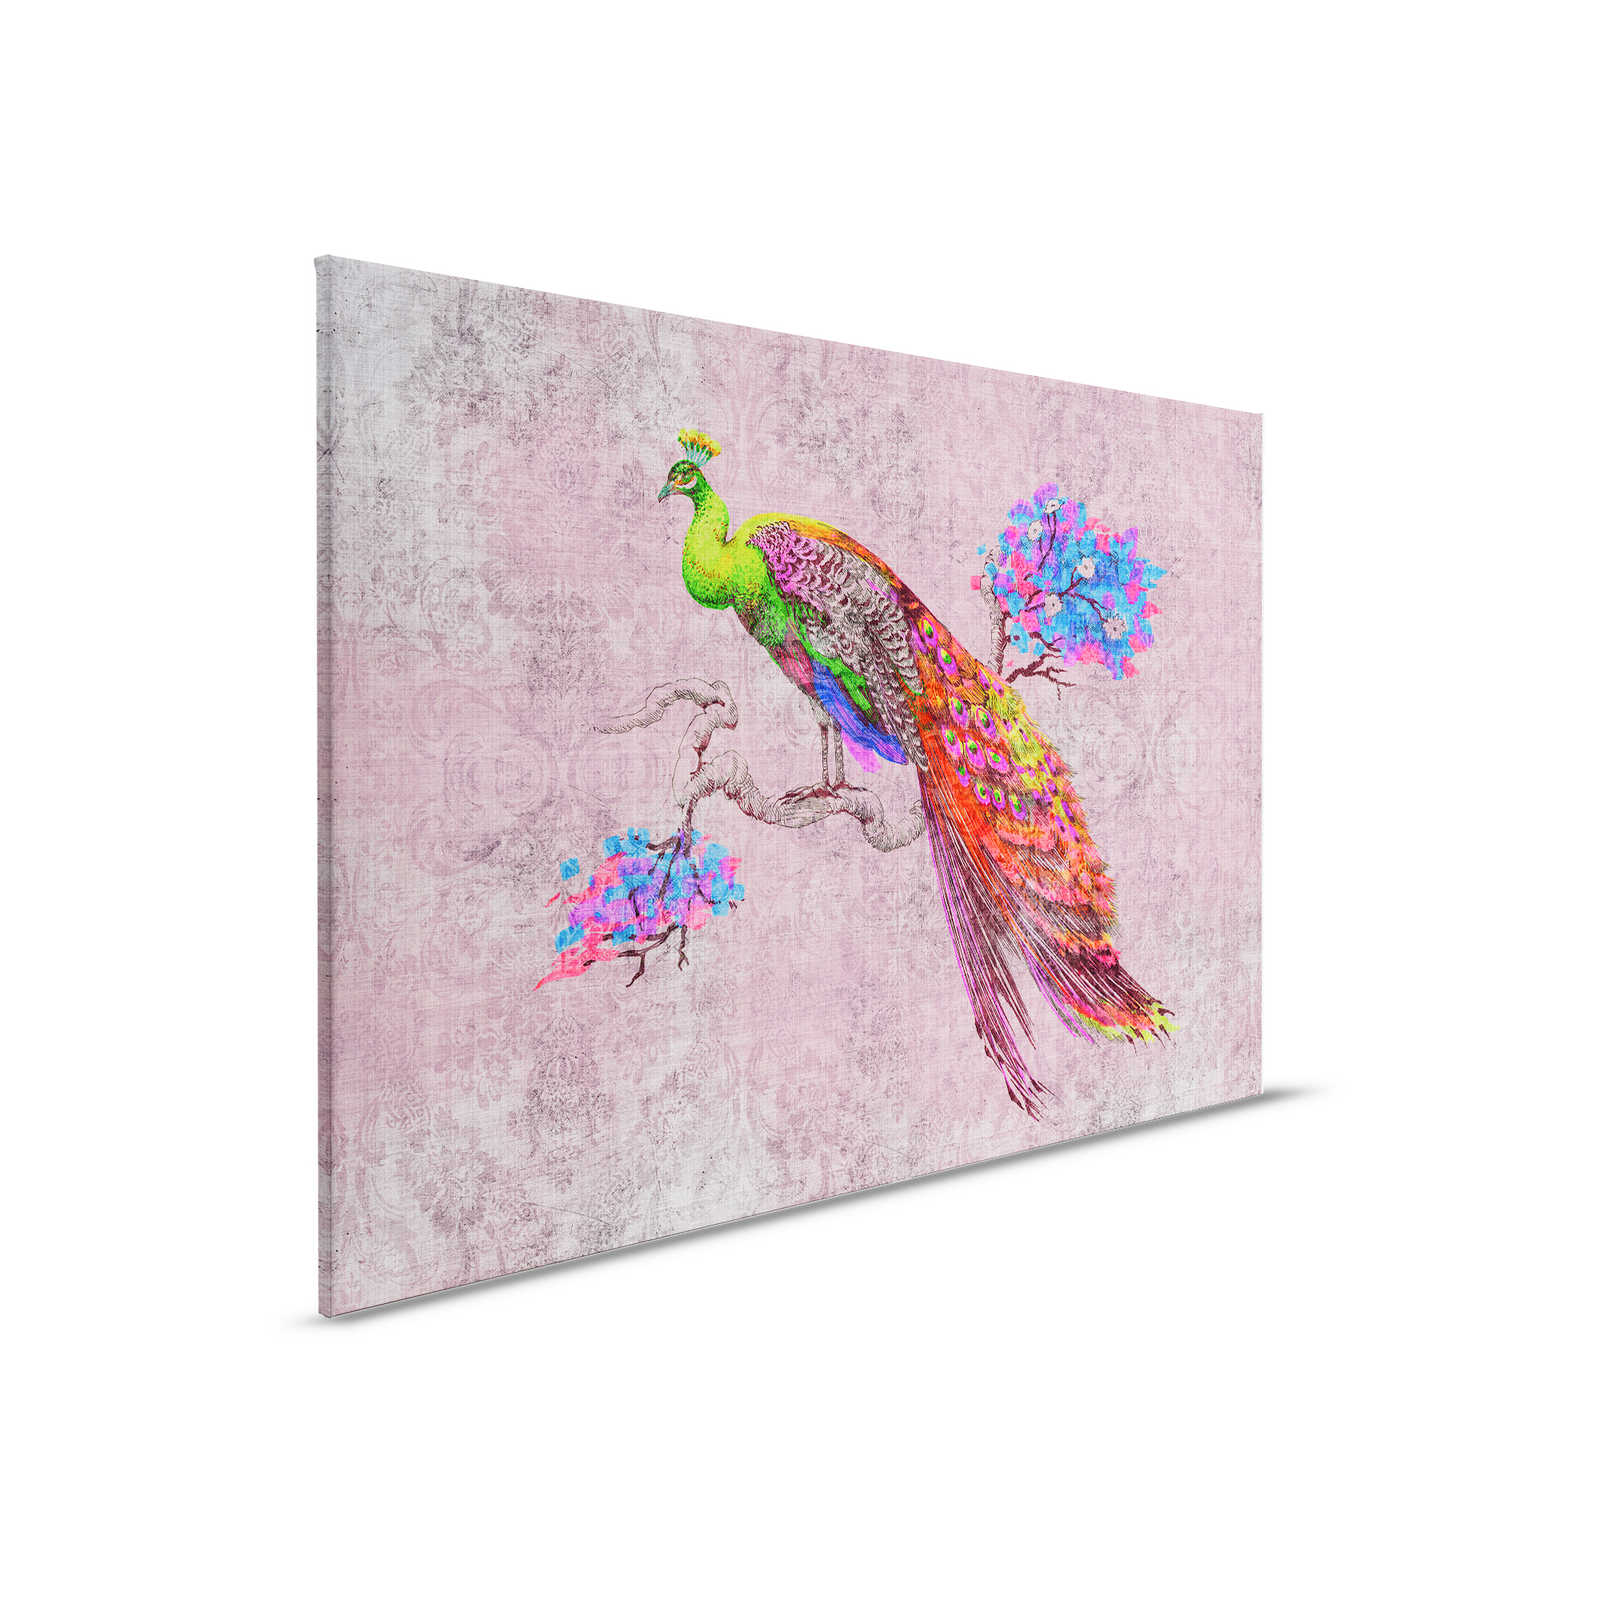 Peacock 2 - Canvas painting with peacock motif & ornament pattern in natural linen structure - 0.90 m x 0.60 m
